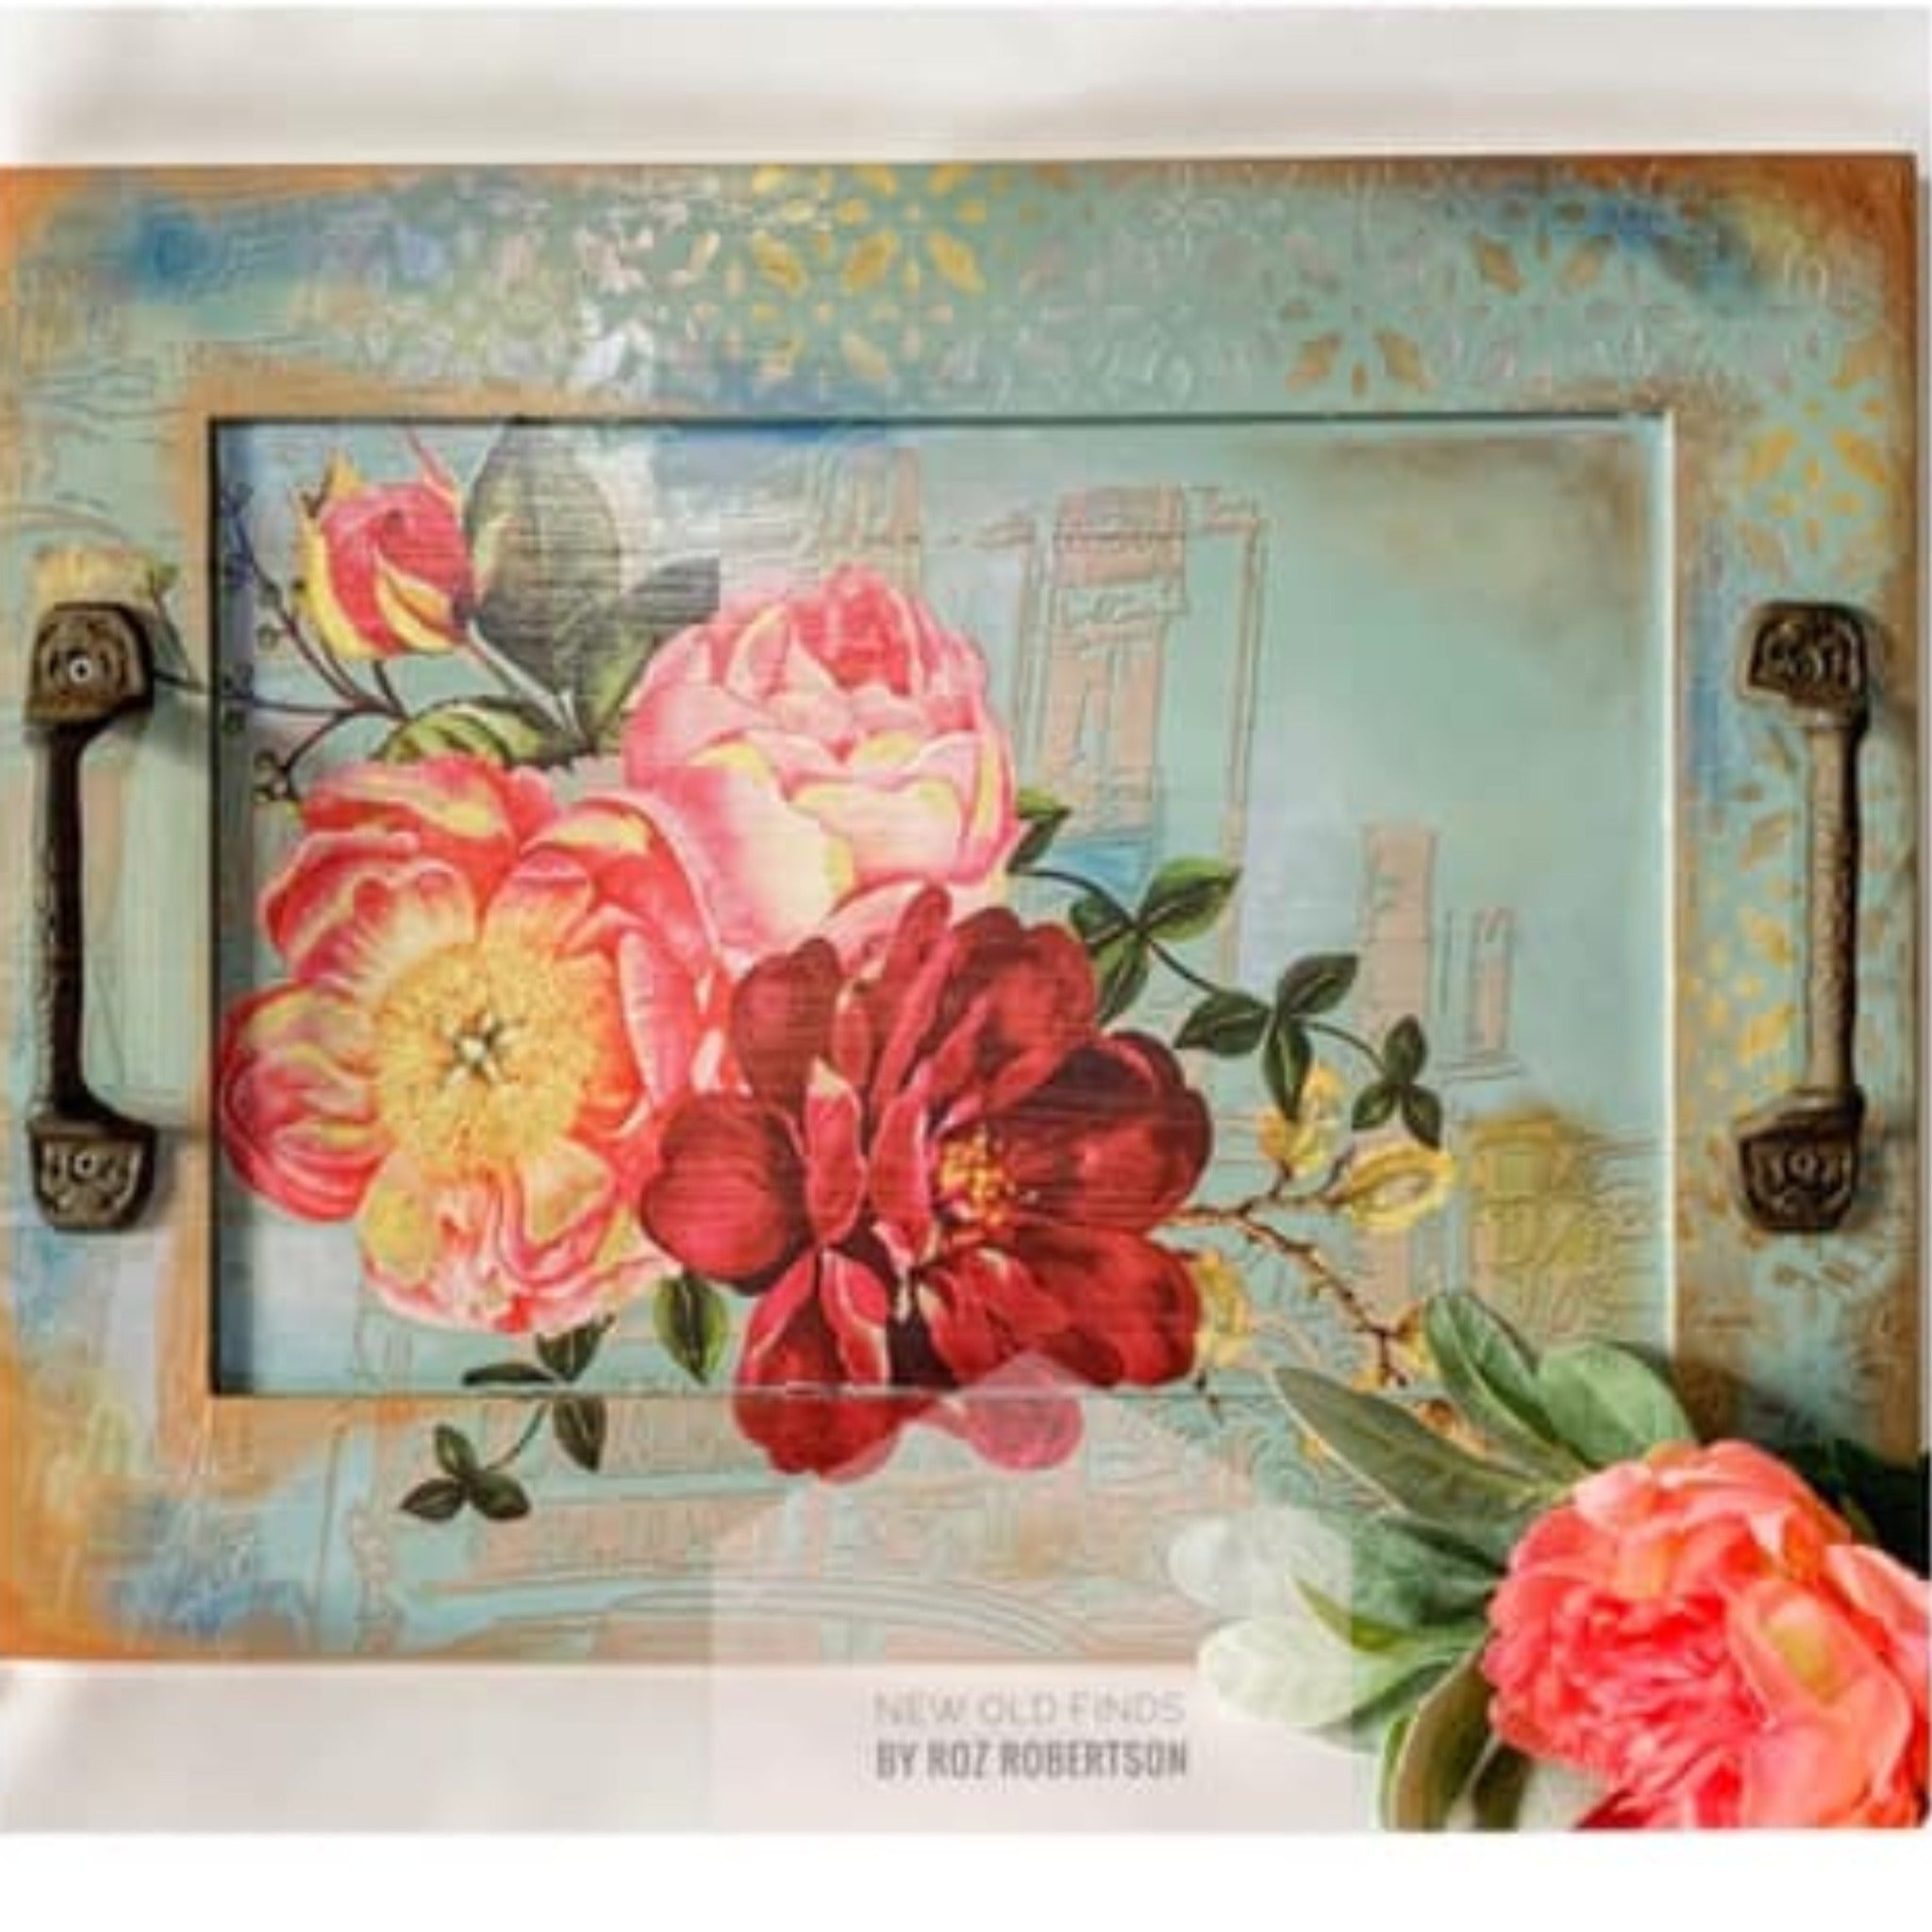 A wood photo frame turned into a serving tray refurbished by New Old Finds by Roz Robertson is painted a patina blend and features ReDesign with Prima's Royal Burgundy transfer on it..